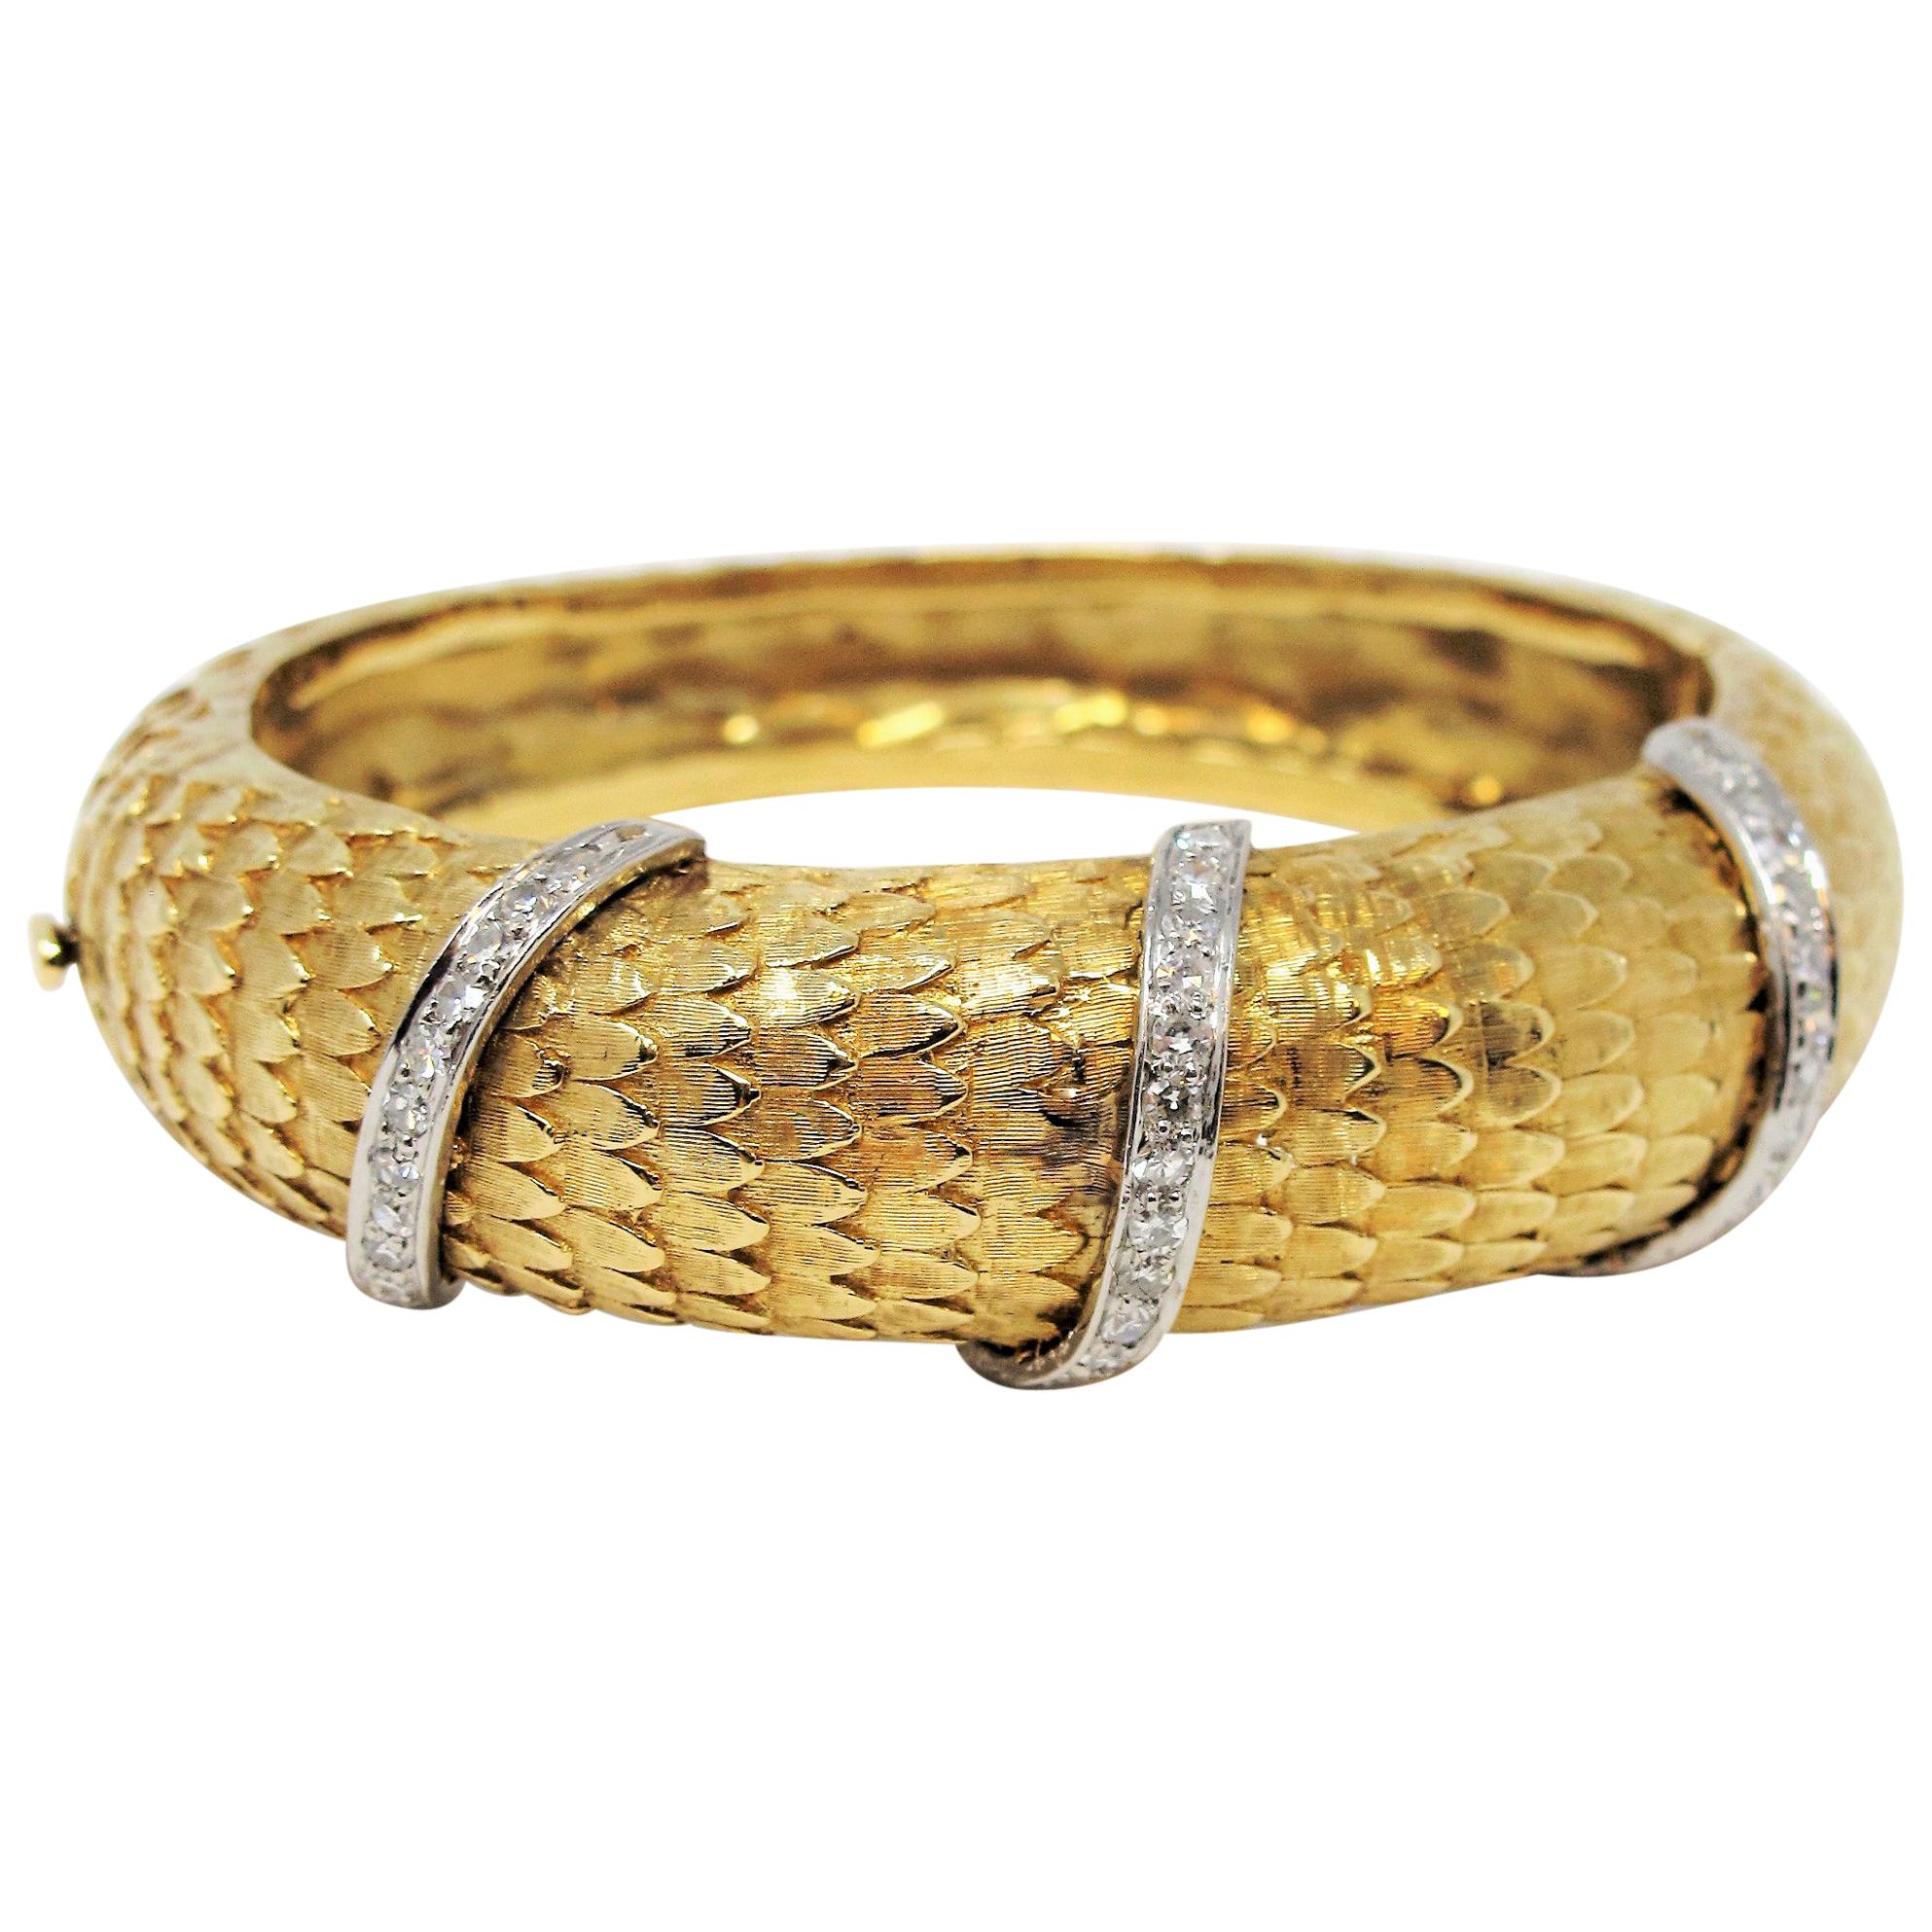 Scaled Hinged Cuff Bracelet in 18 Karat Yellow Gold with Pave Diamond Wraps